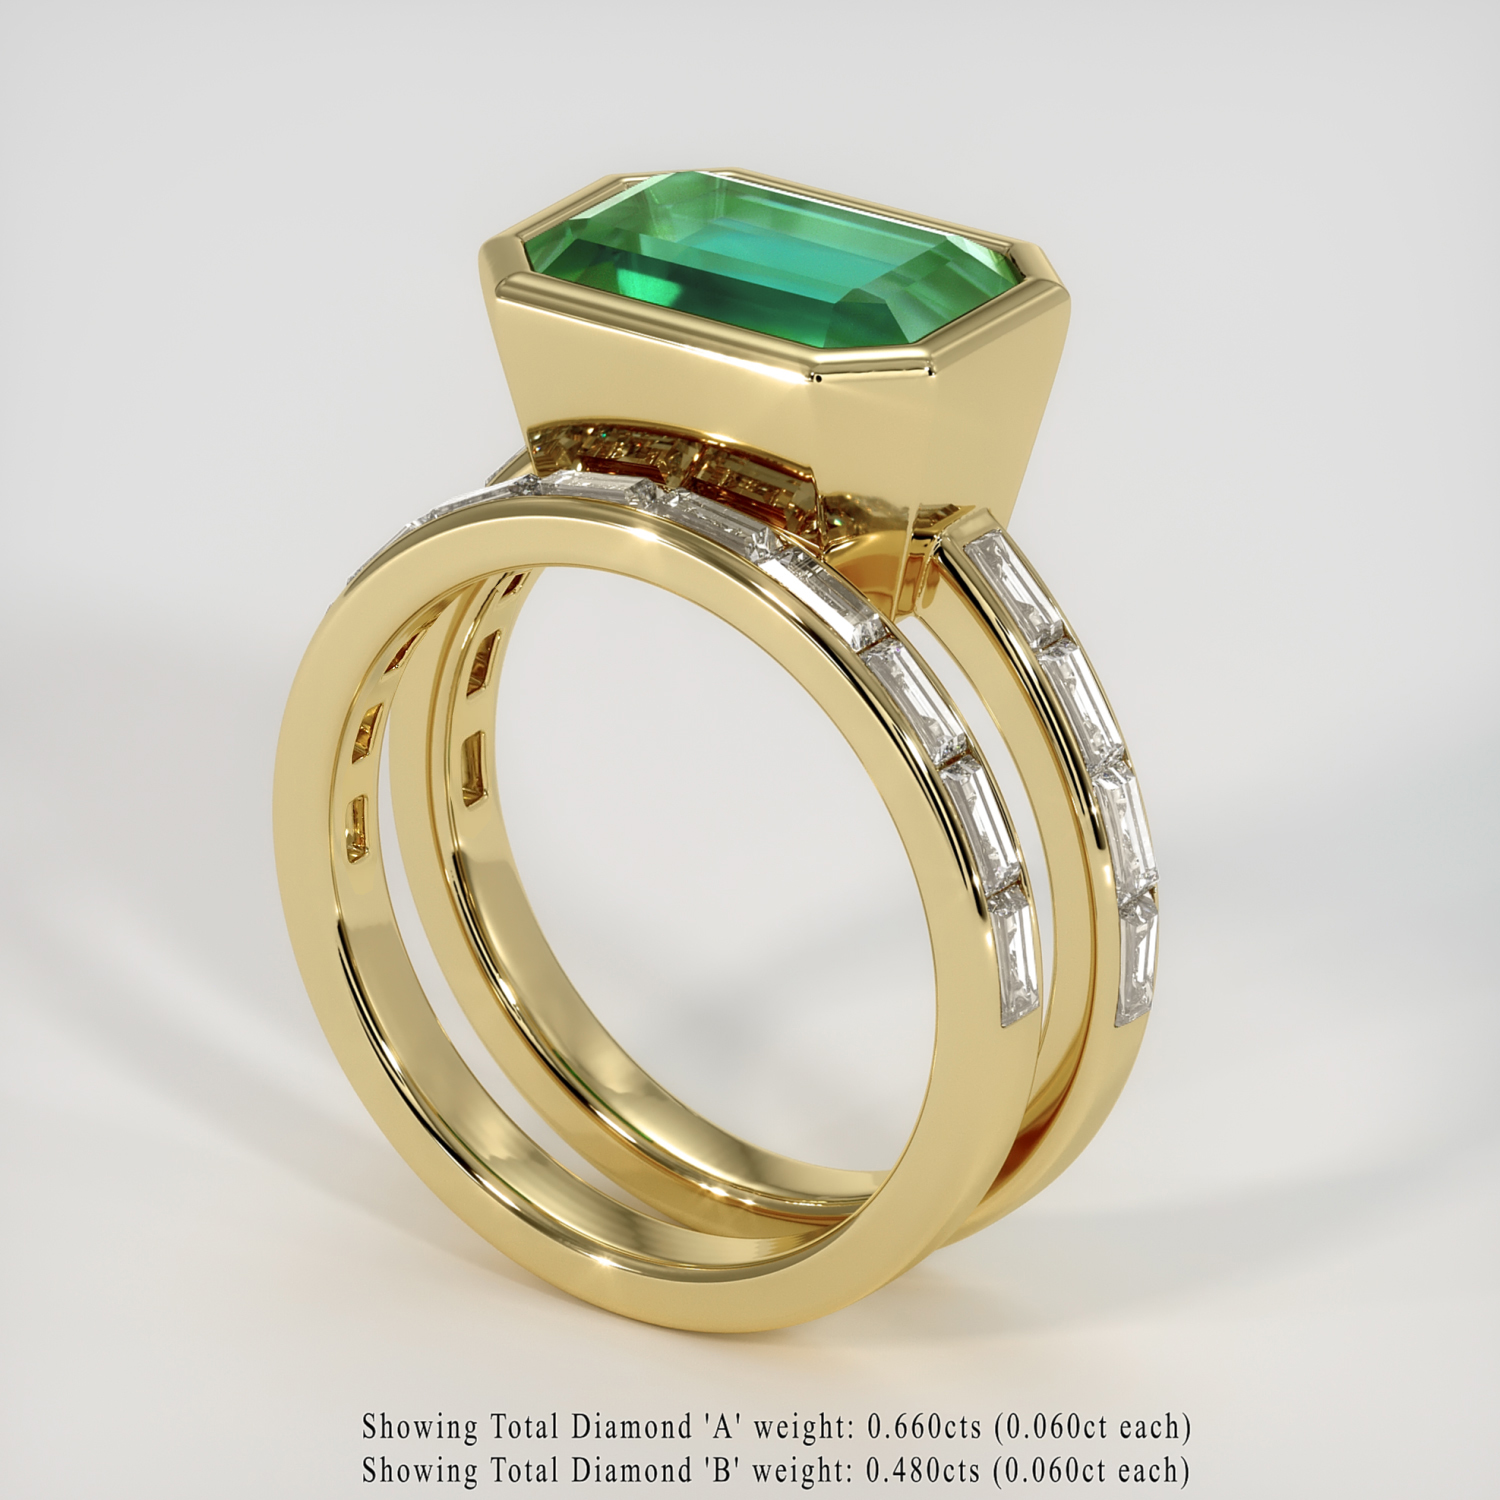 Emerald Ring 3.87 Ct. 18K Yellow Gold | The Natural Emerald Company